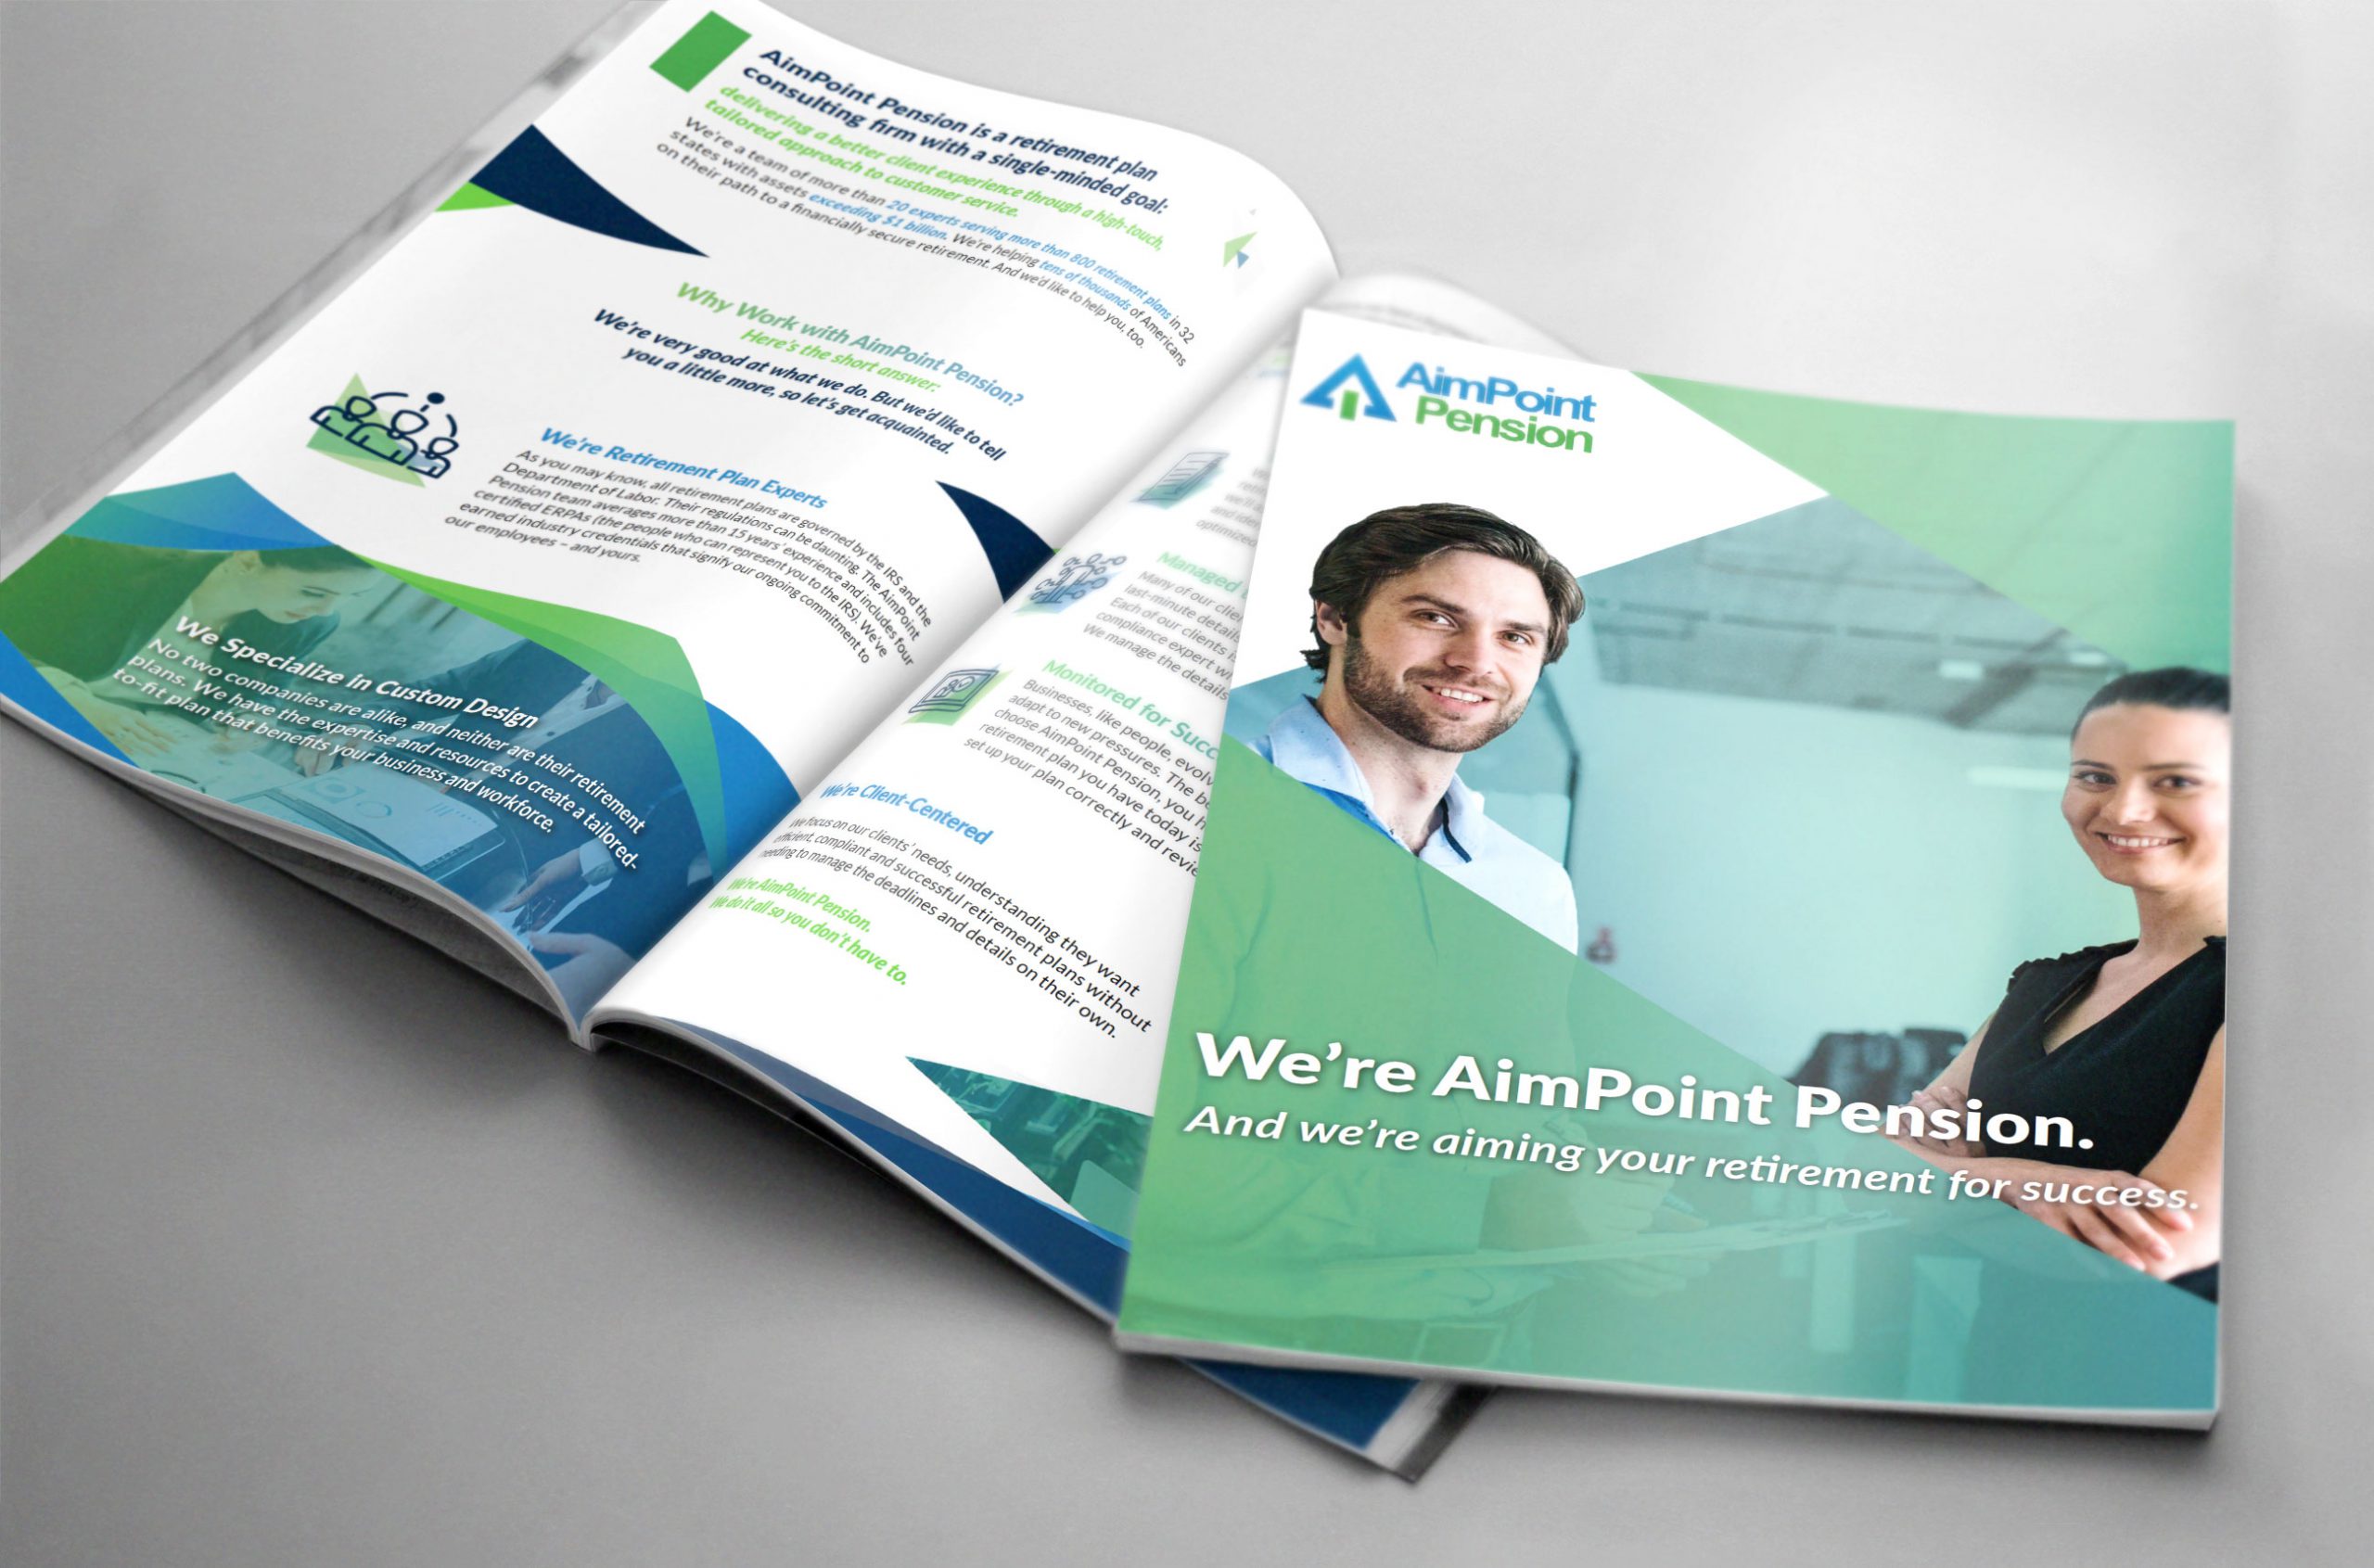 AimPoint Pension overview brochure